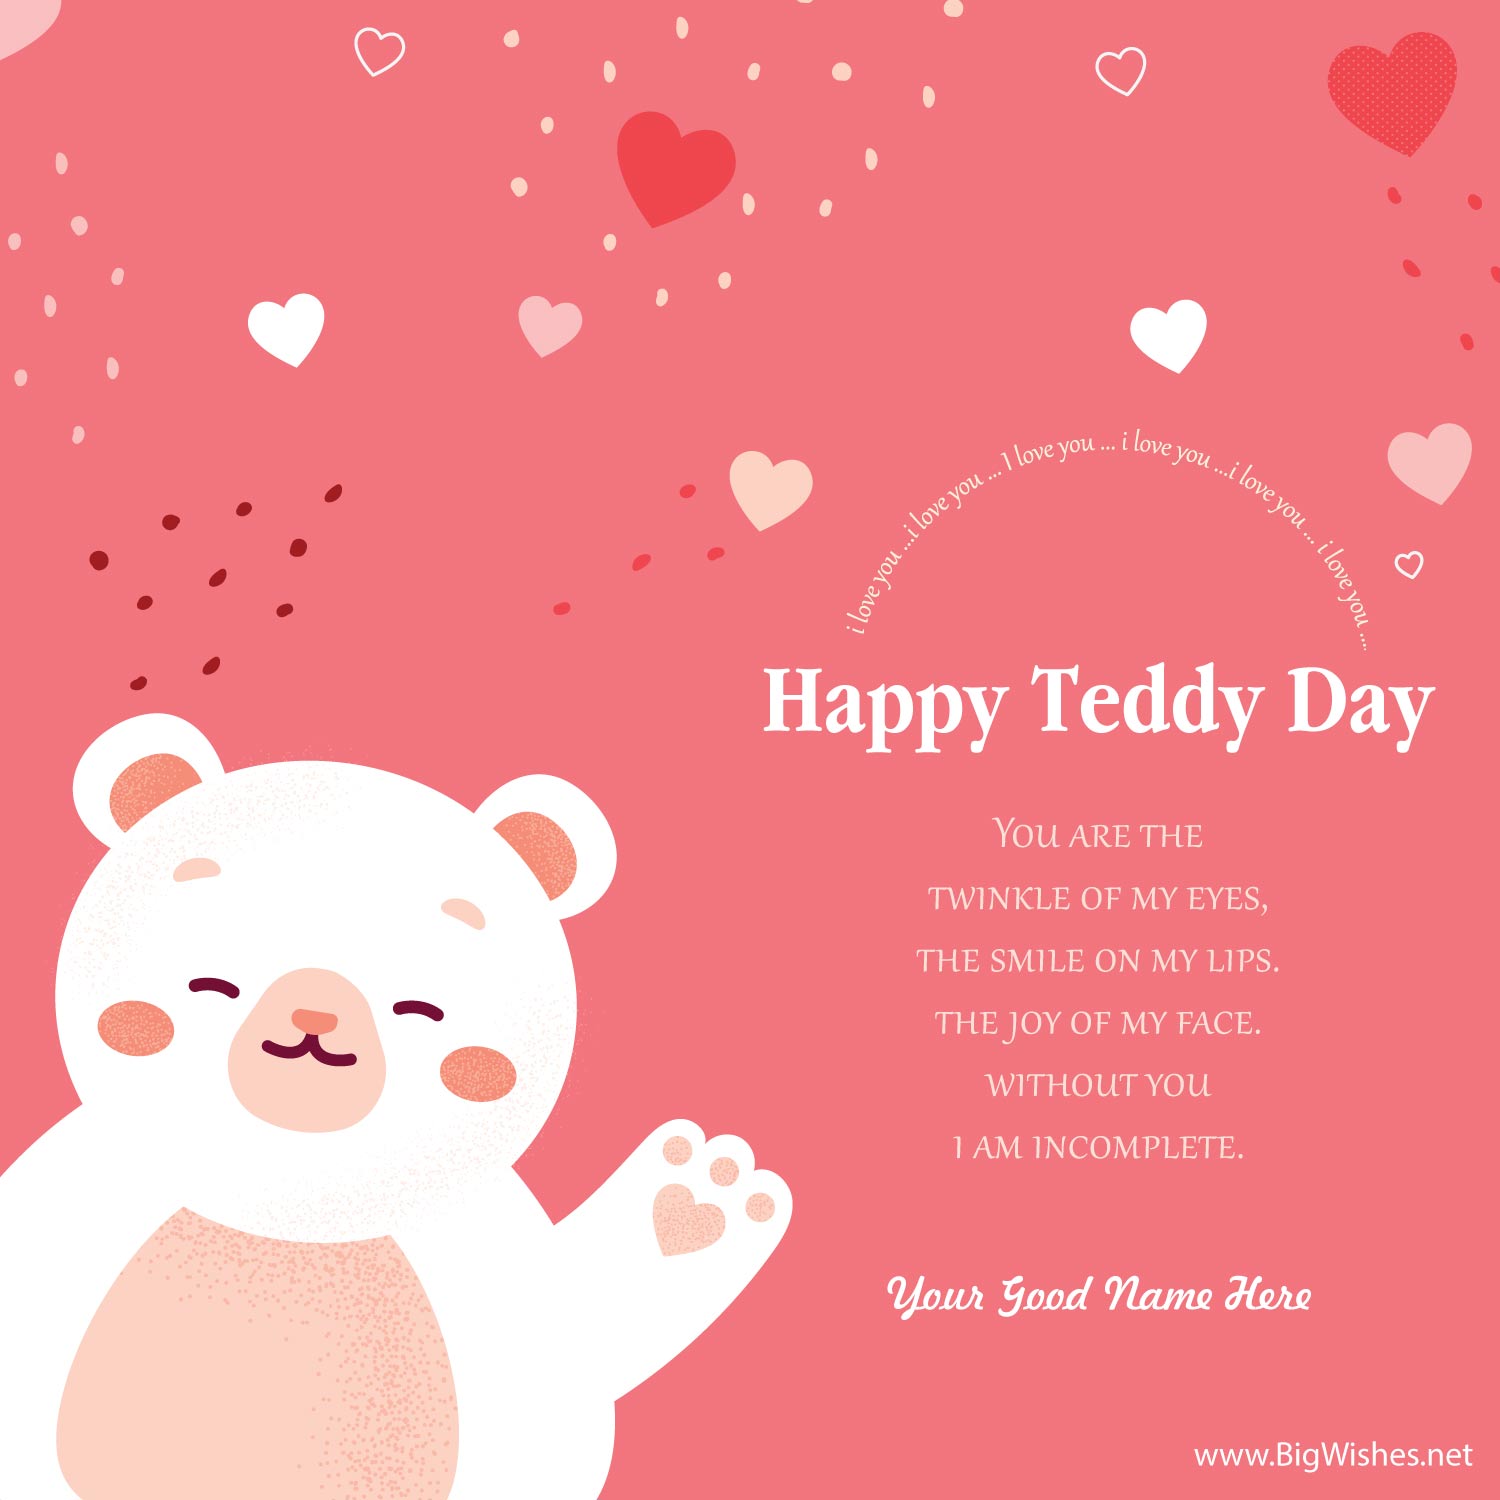 Happy Teddy Day Wishes Image